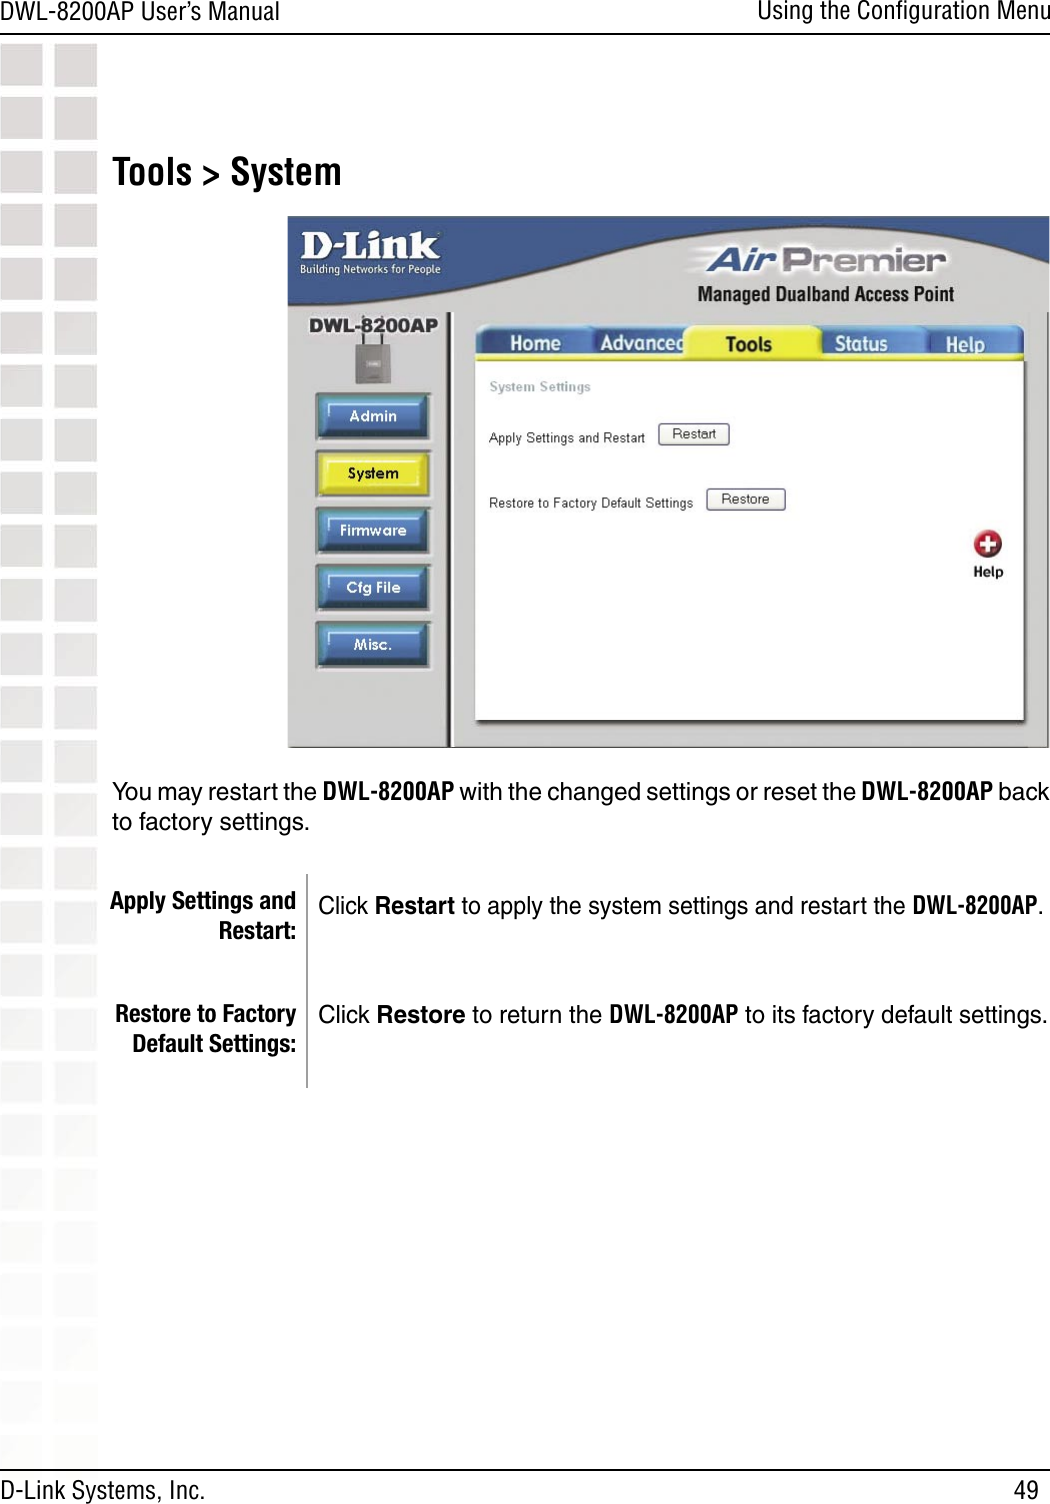 49DWL-8200AP User’s ManualD-Link Systems, Inc.Using the Conﬁguration MenuApply Settings and Restart:Restore to Factory Default Settings:Click Restart to apply the system settings and restart the DWL-8200AP.Click Restore to return the DWL-8200AP to its factory default settings.Tools &gt; SystemYou may restart the DWL-8200AP with the changed settings or reset the DWL-8200AP back to factory settings.